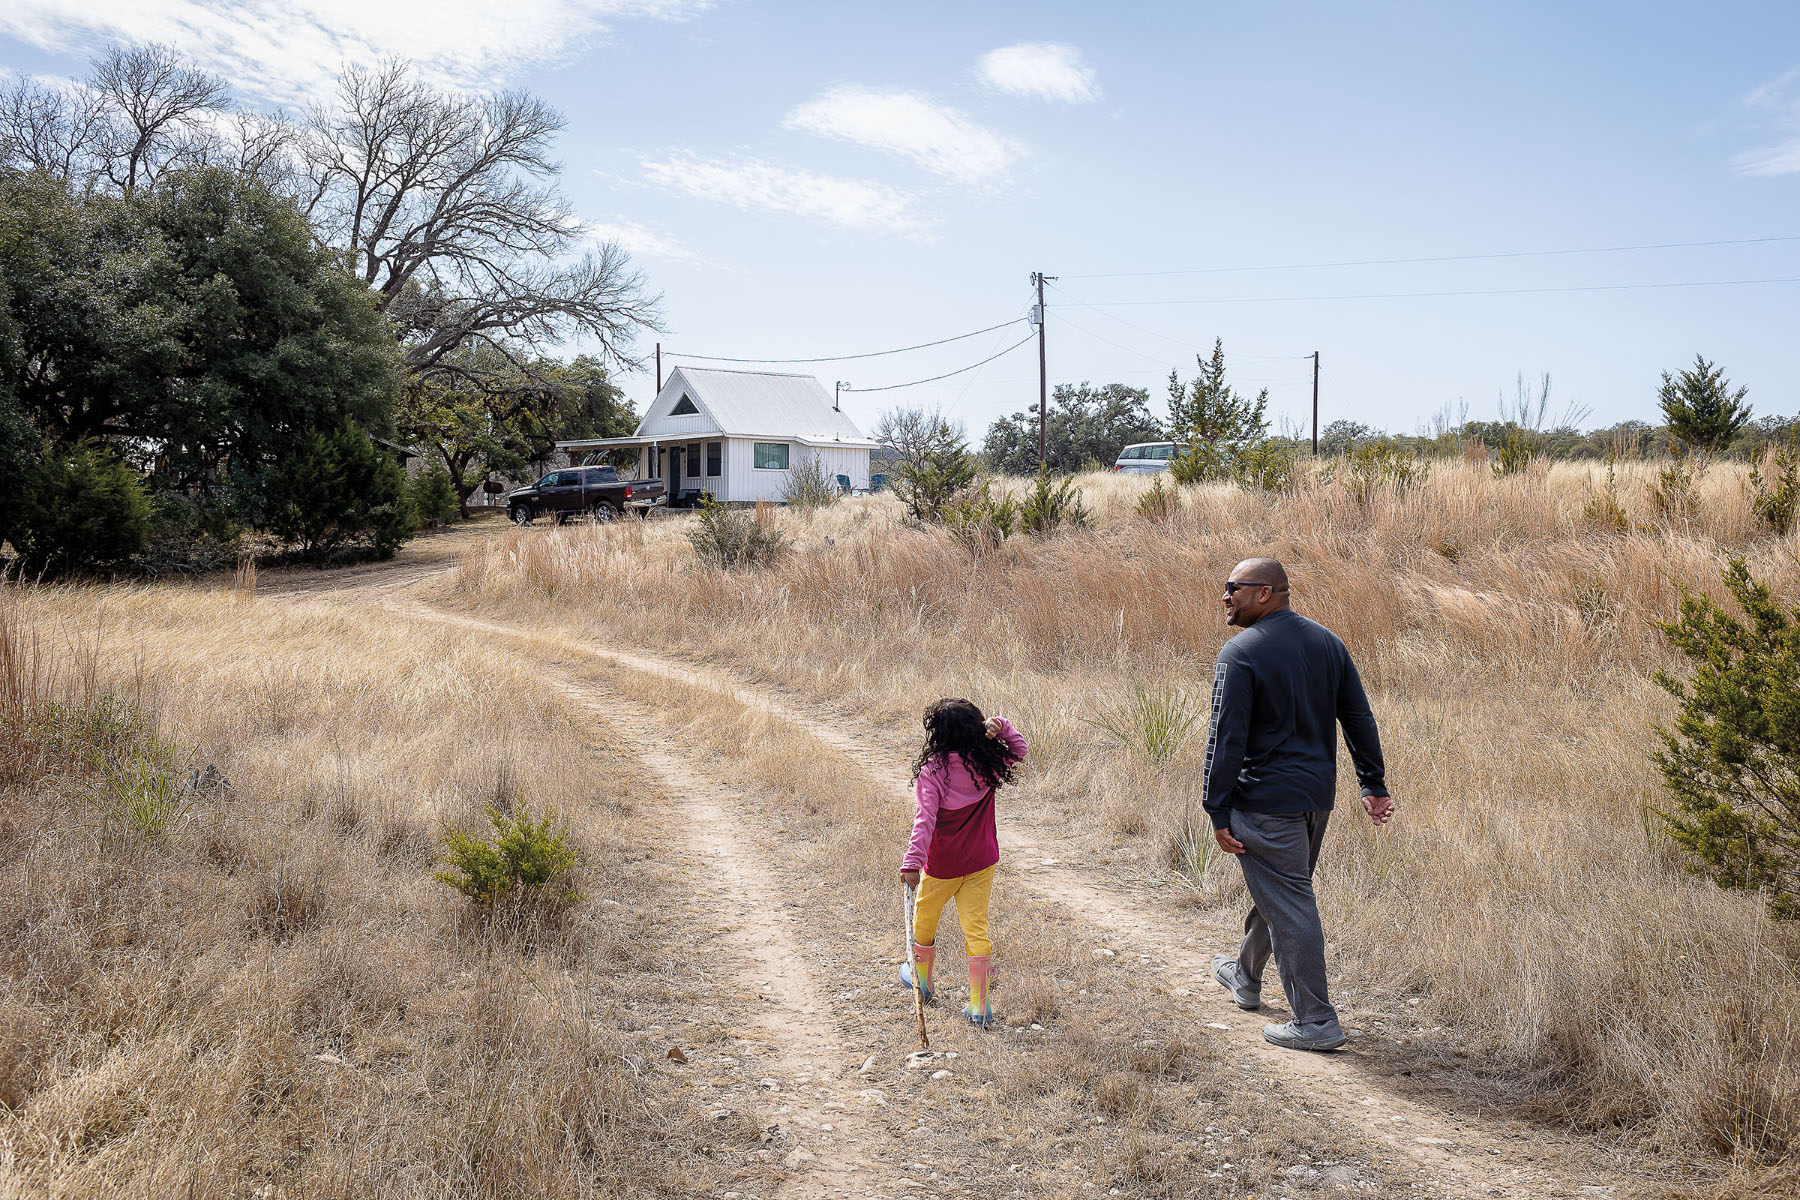 A man and his daughter walk down a tire-track dirt path in a dry Hill Country landscape with a white house in the background